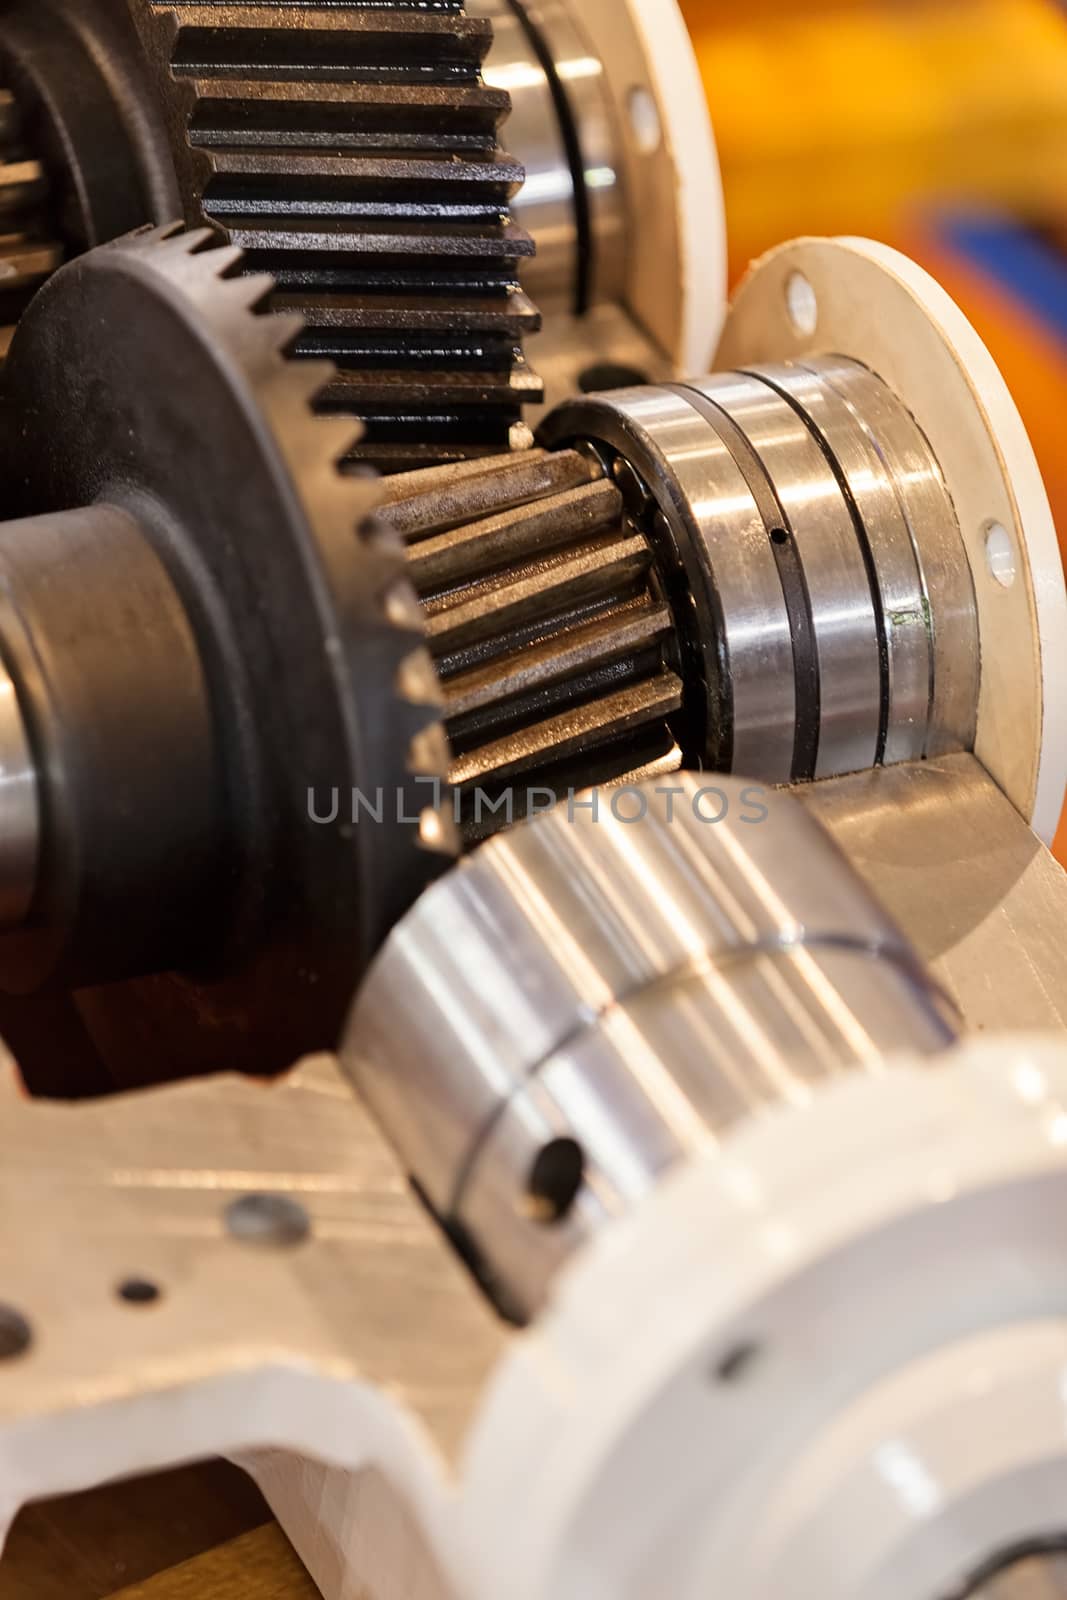 Details of gear machines, note shallow depth of field